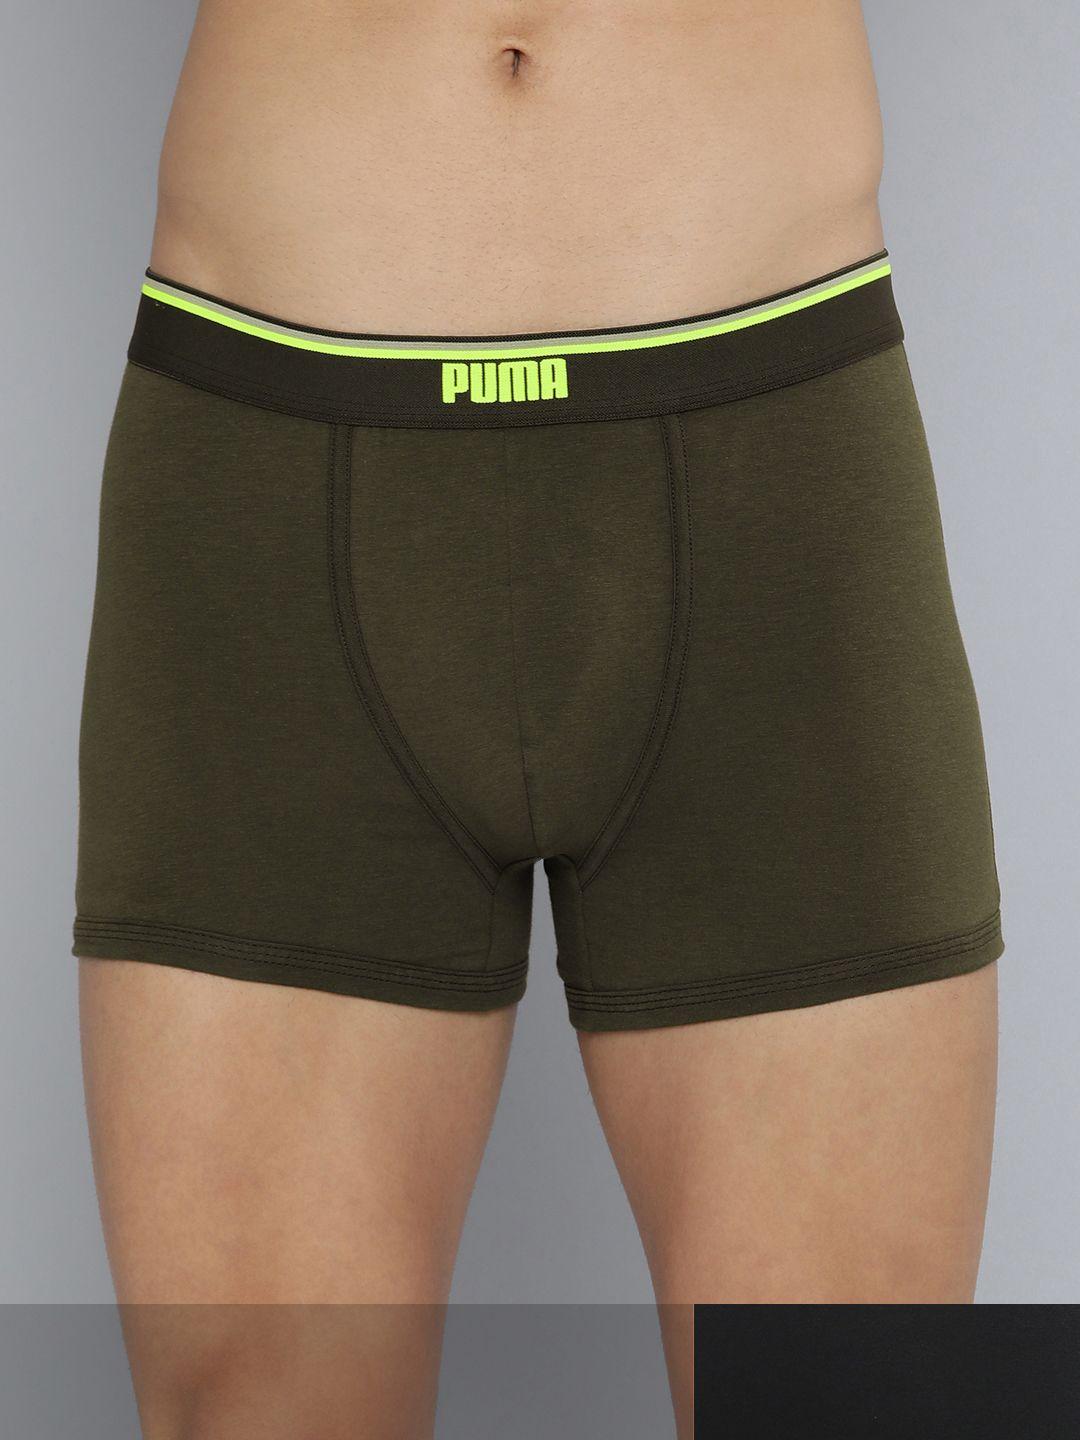 puma men pack of 2 solid anti-microbial stretch trunks 93212501